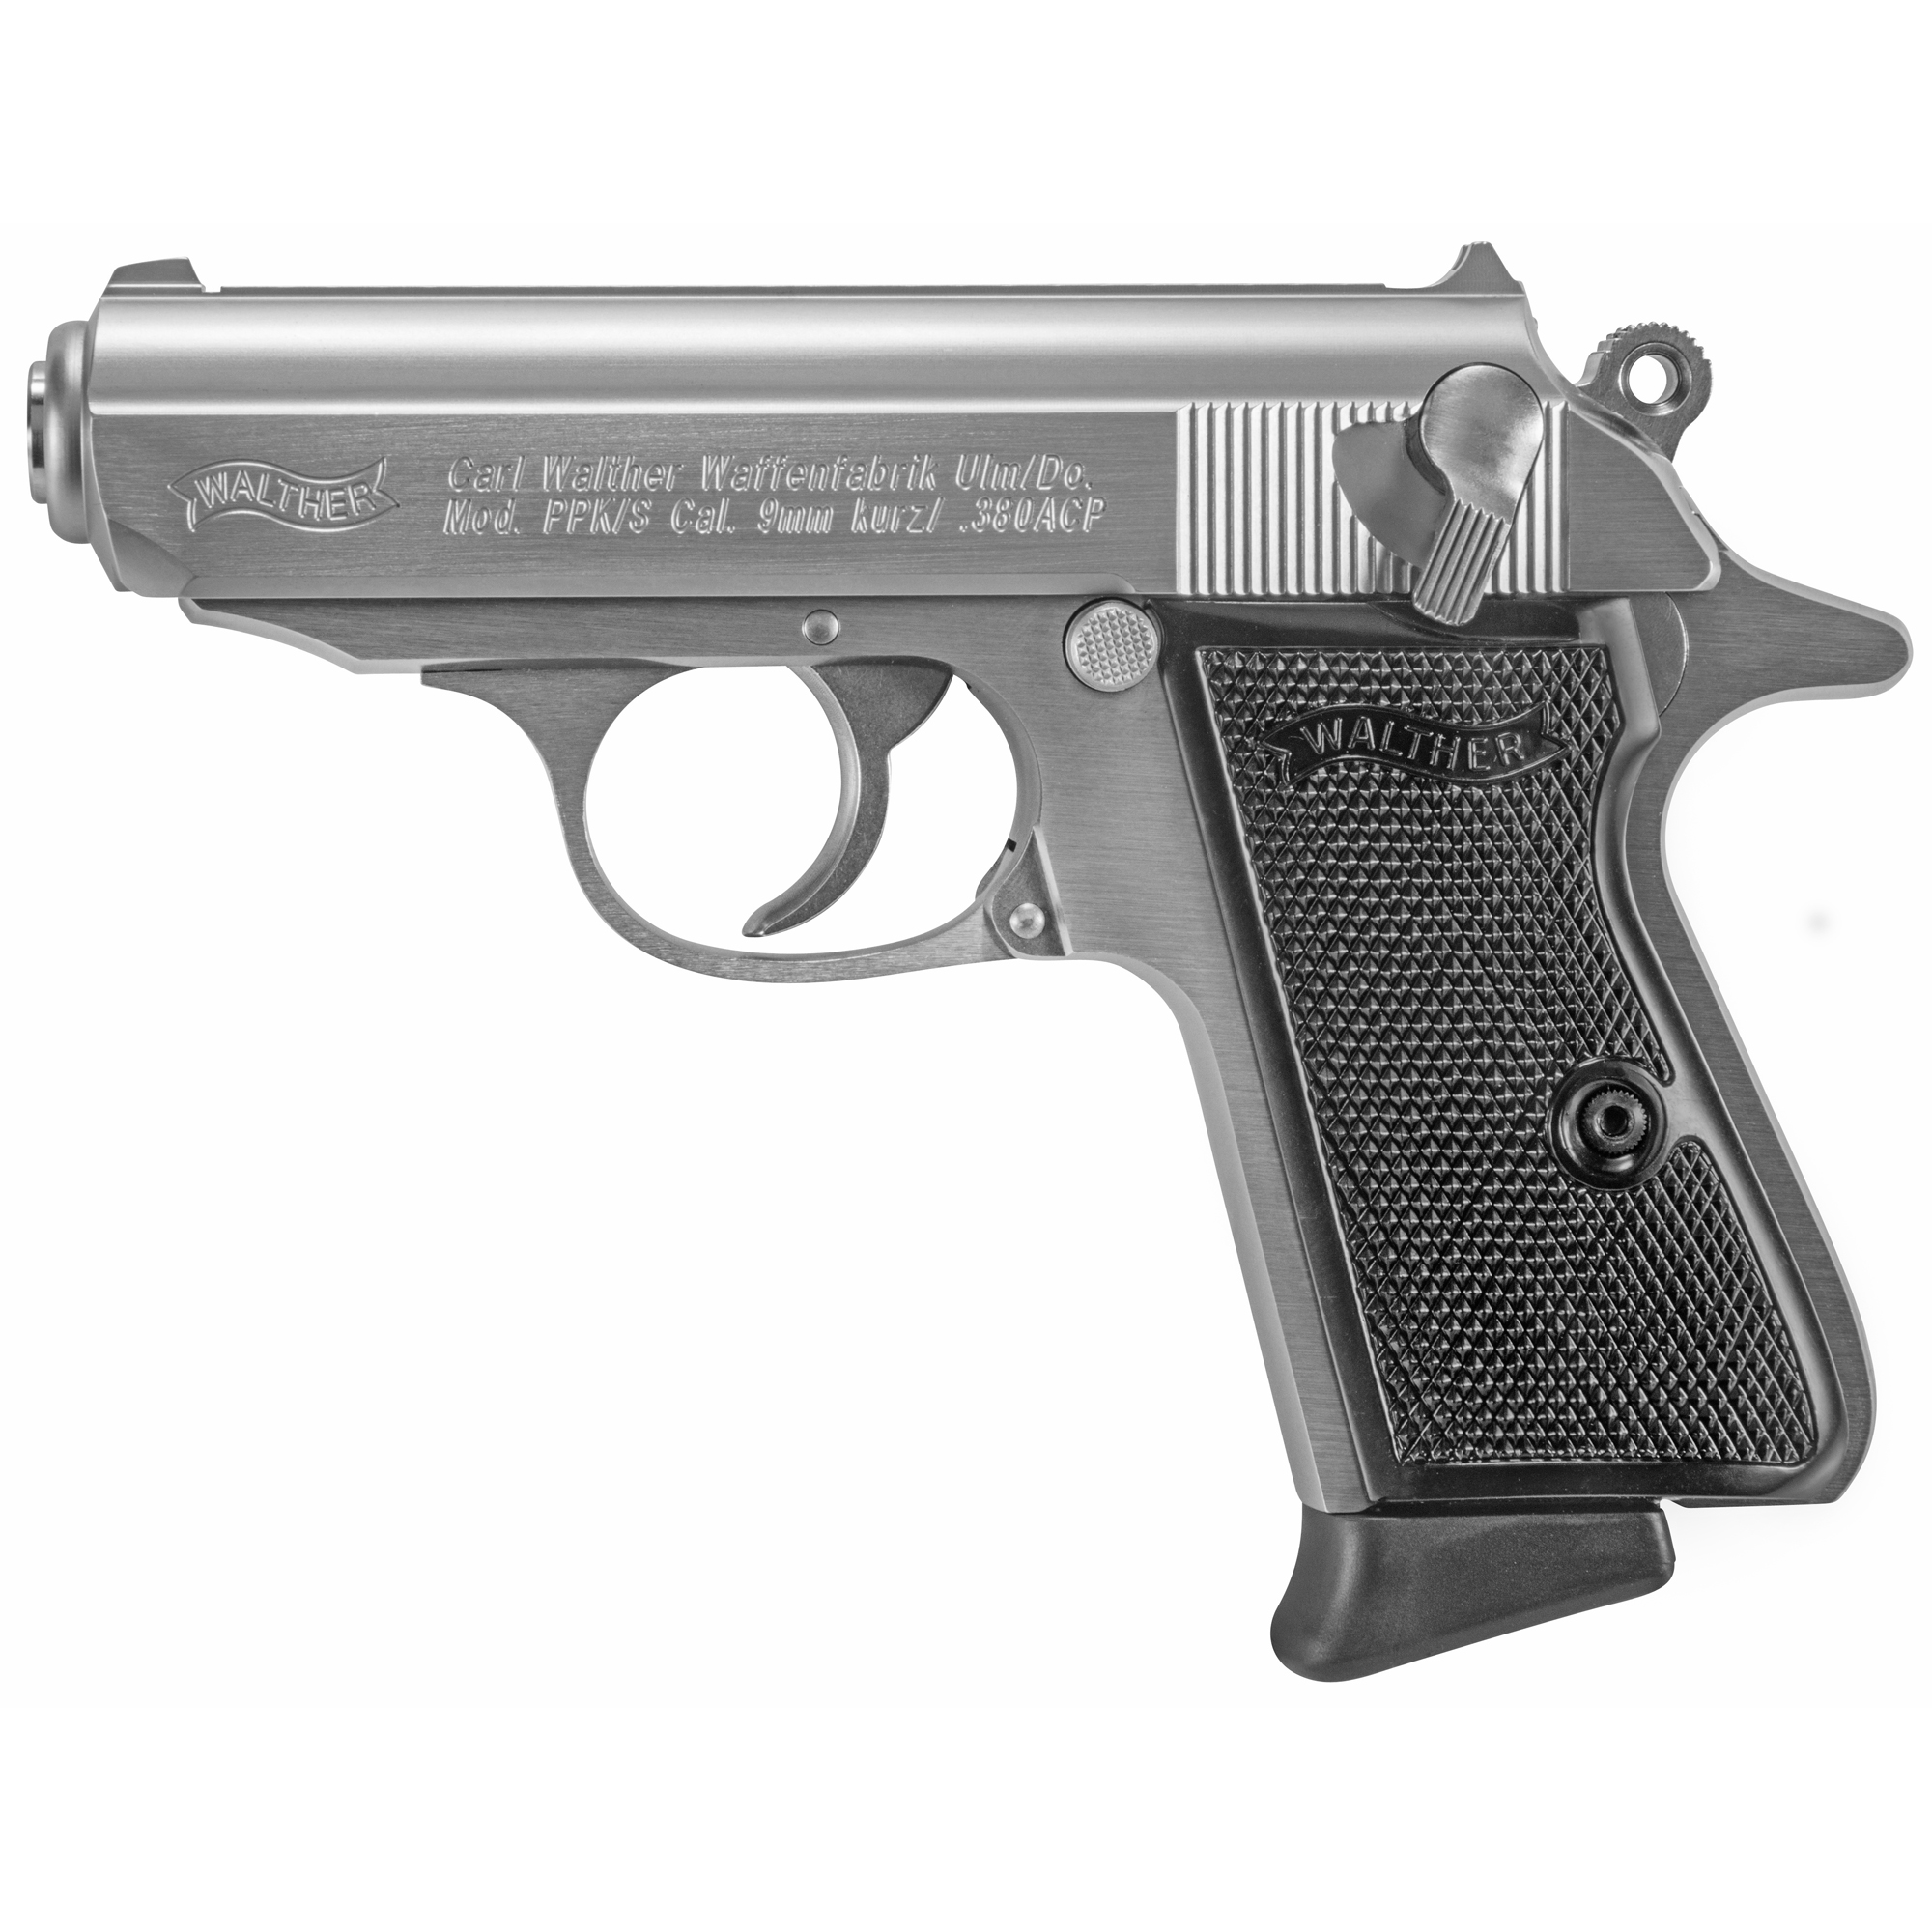 WALTHER PPK/S 380ACP 3.3 7RD STS